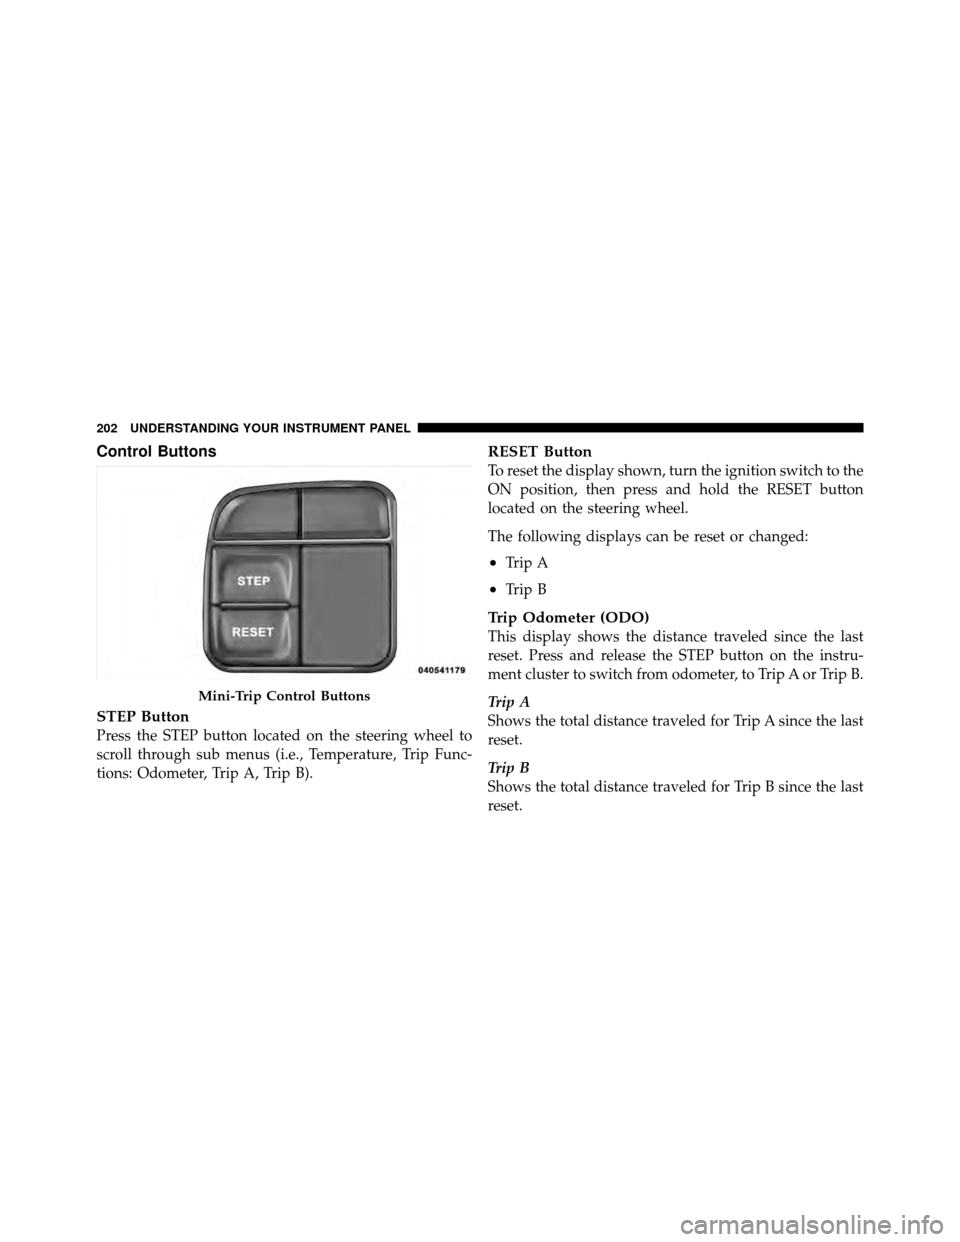 DODGE AVENGER 2011 2.G Owners Manual Control Buttons
STEP Button
Press the STEP button located on the steering wheel to
scroll through sub menus (i.e., Temperature, Trip Func-
tions: Odometer, Trip A, Trip B).
RESET Button
To reset the d